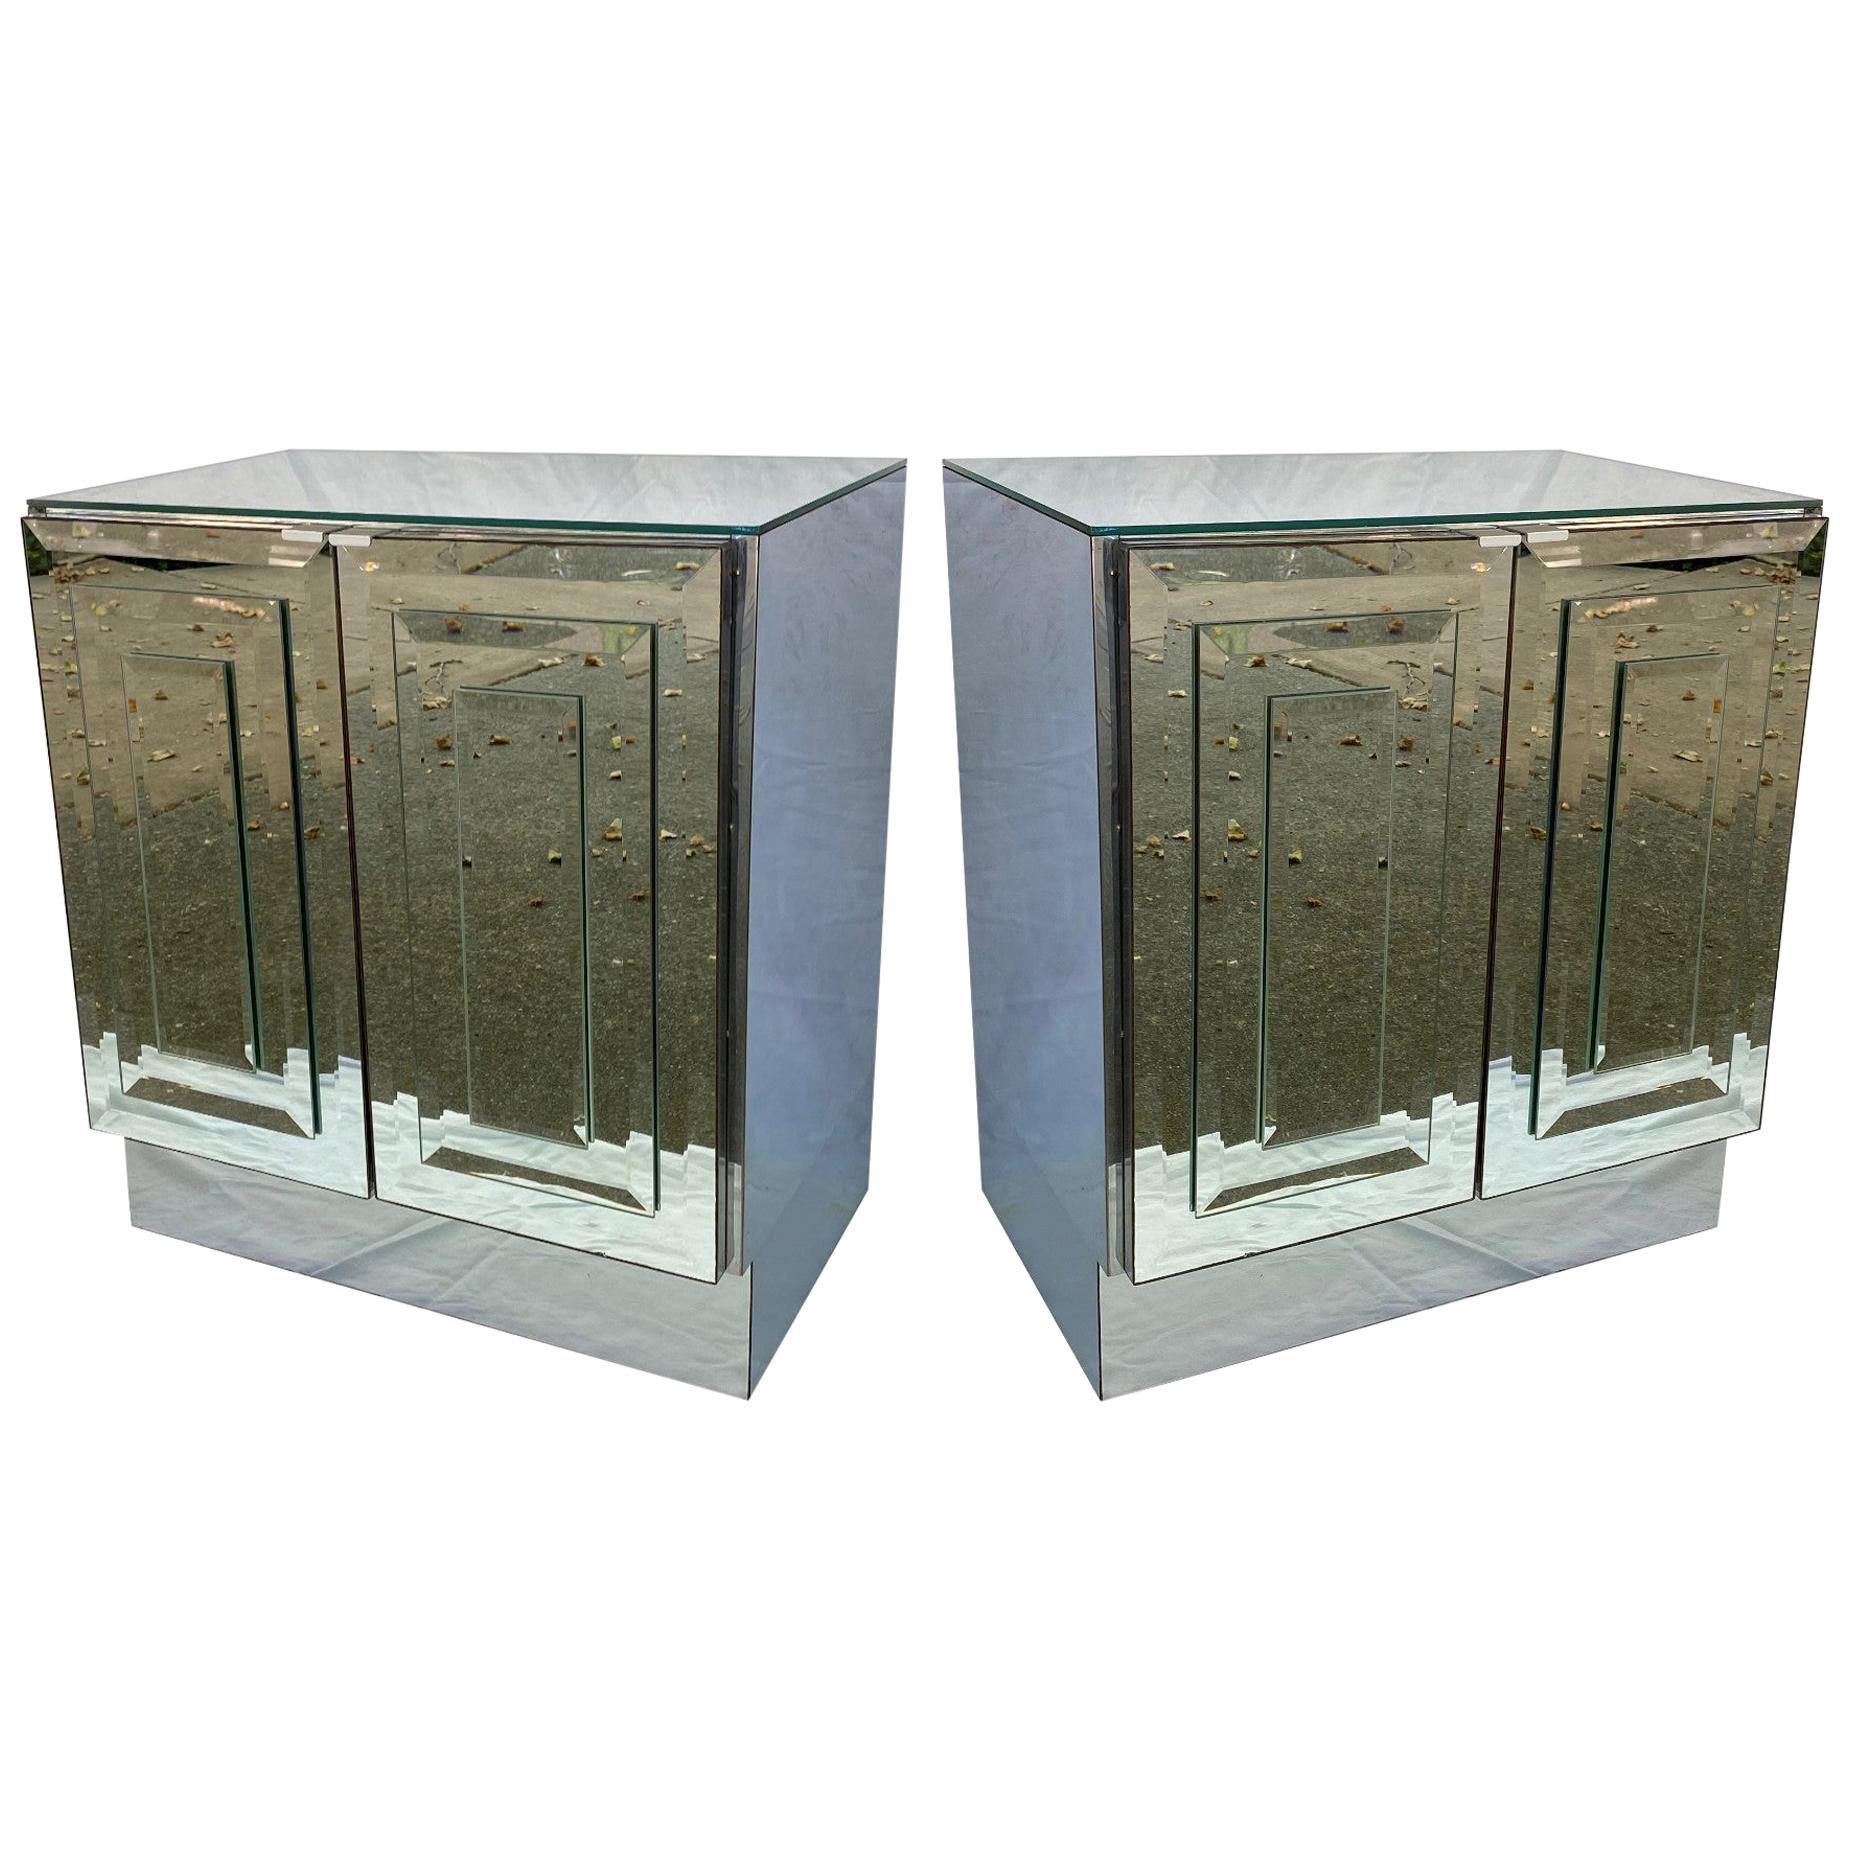 Pair of Mirrored Cabinets or Nightstands by Ello Furniture